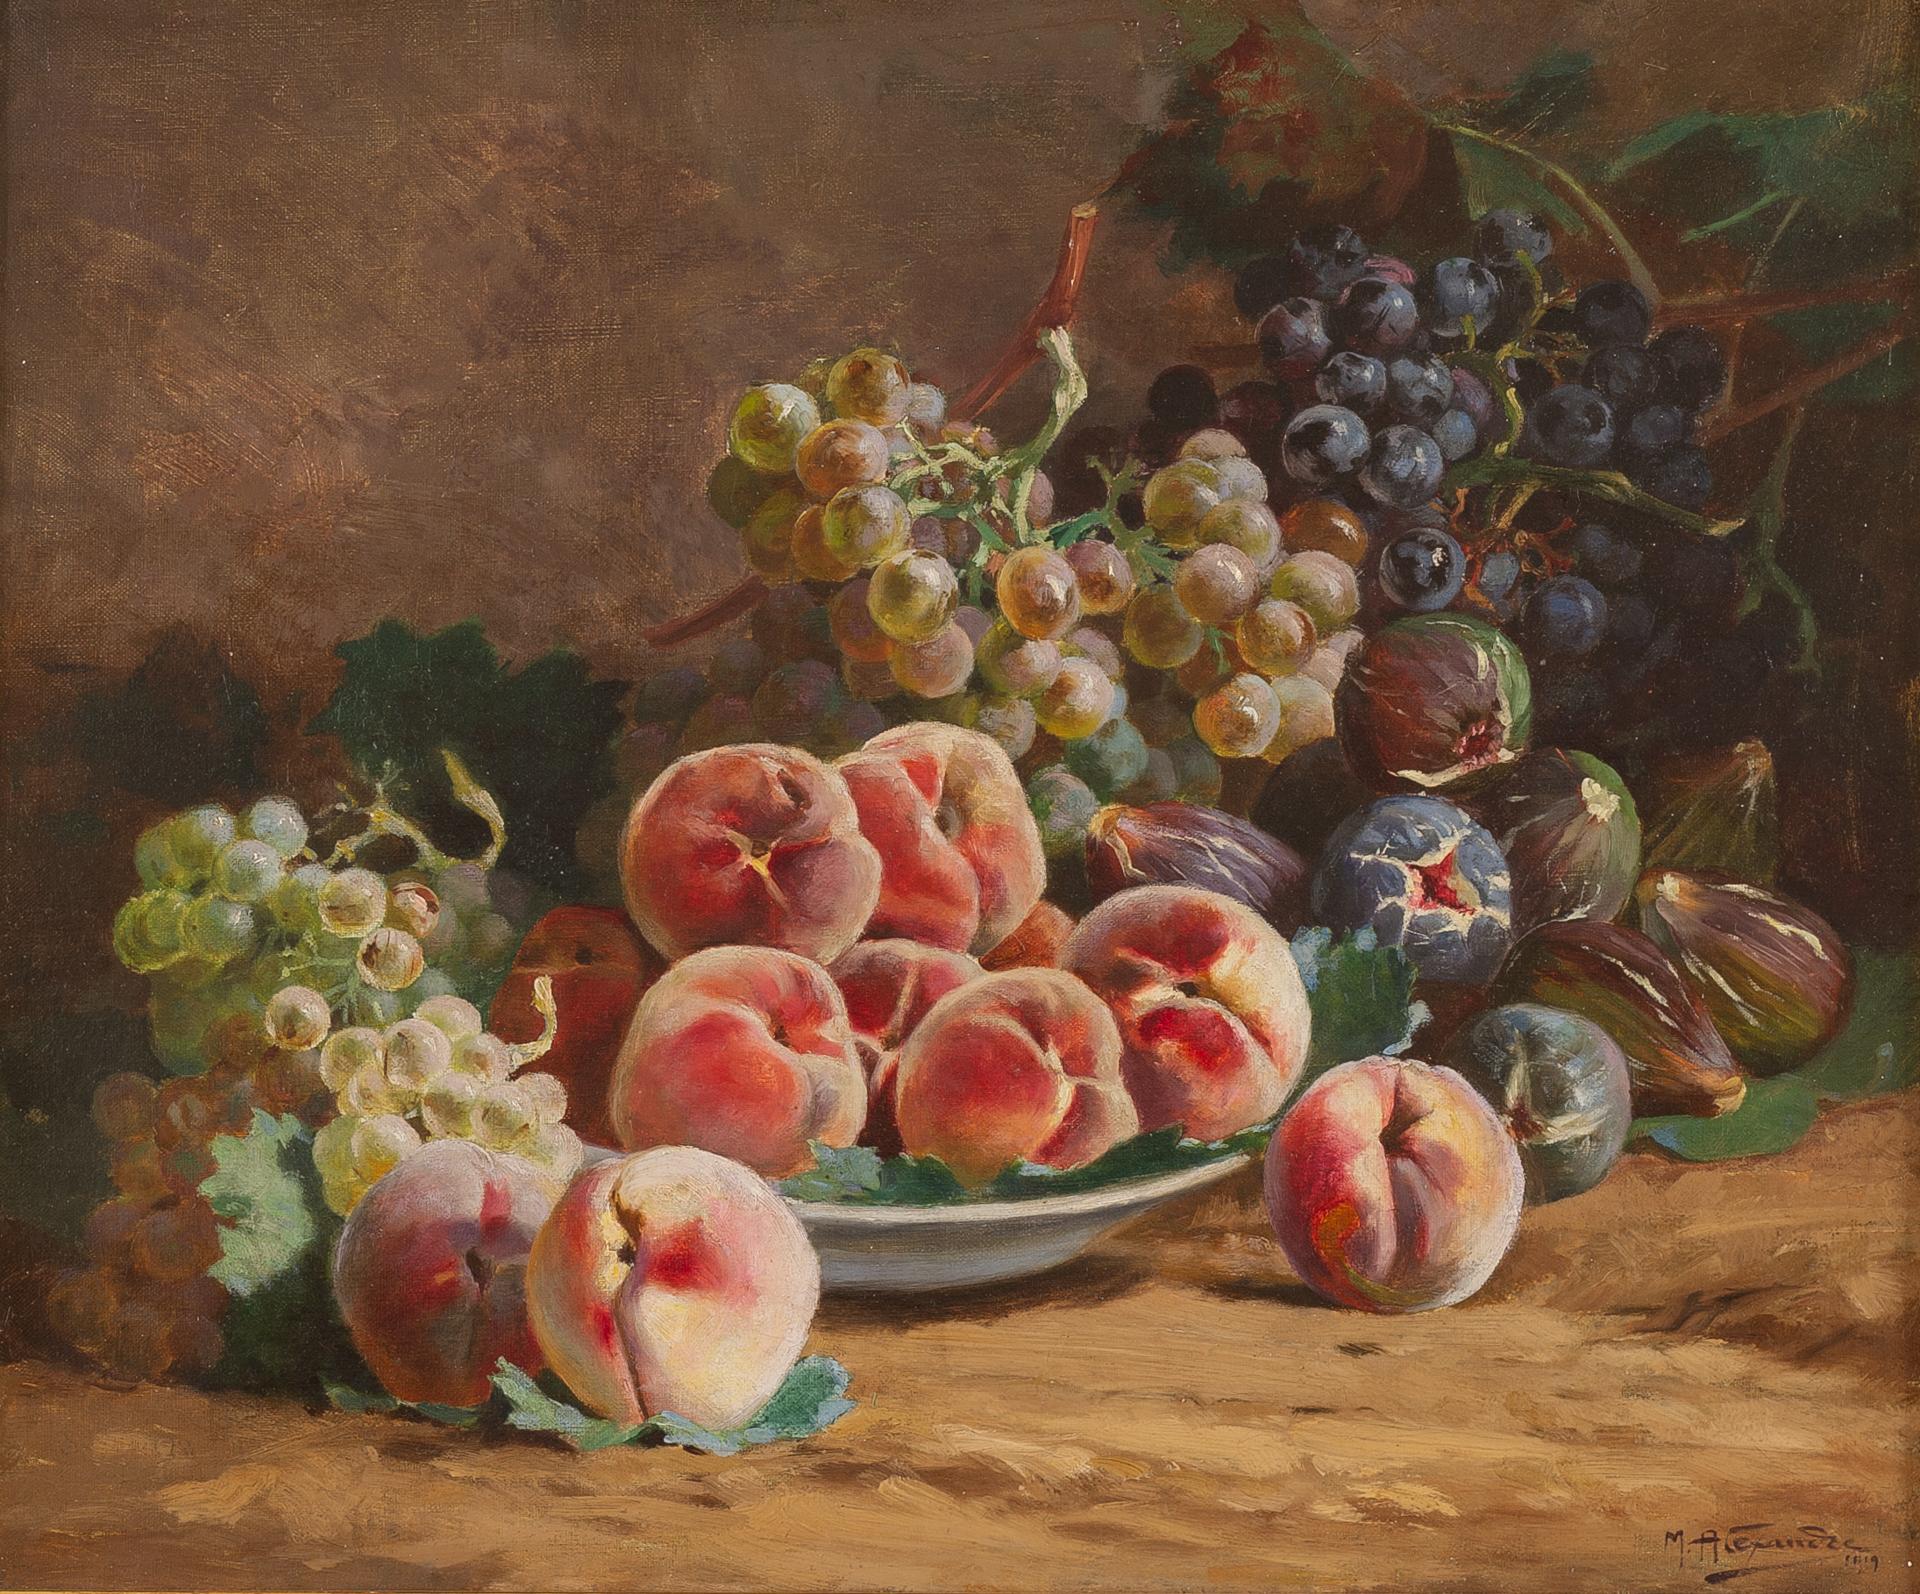 Picture with peaches, figs and grapes : painted and signed by Marie Alexandre , born in France in 1880. This painting is dated 1919 .
Some restorations in the canvas do not affect the painting. Let's not forget that there were two world wars in